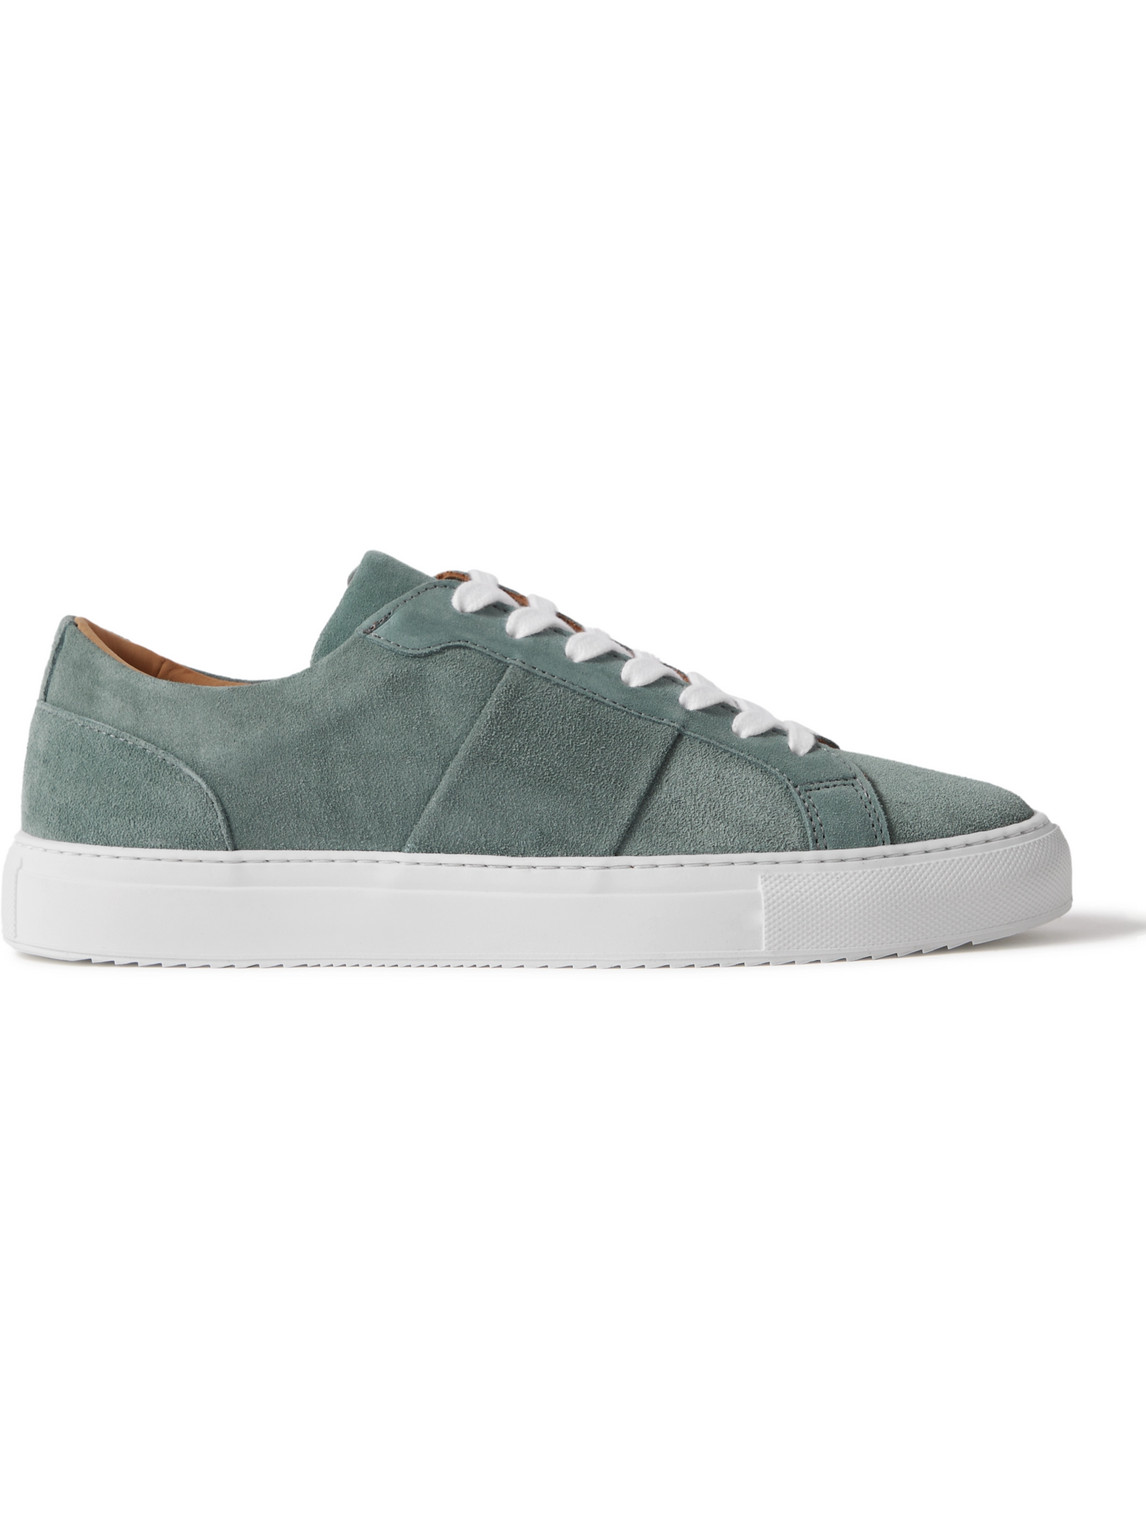 Alec Regenerated Suede by evolo® Sneakers